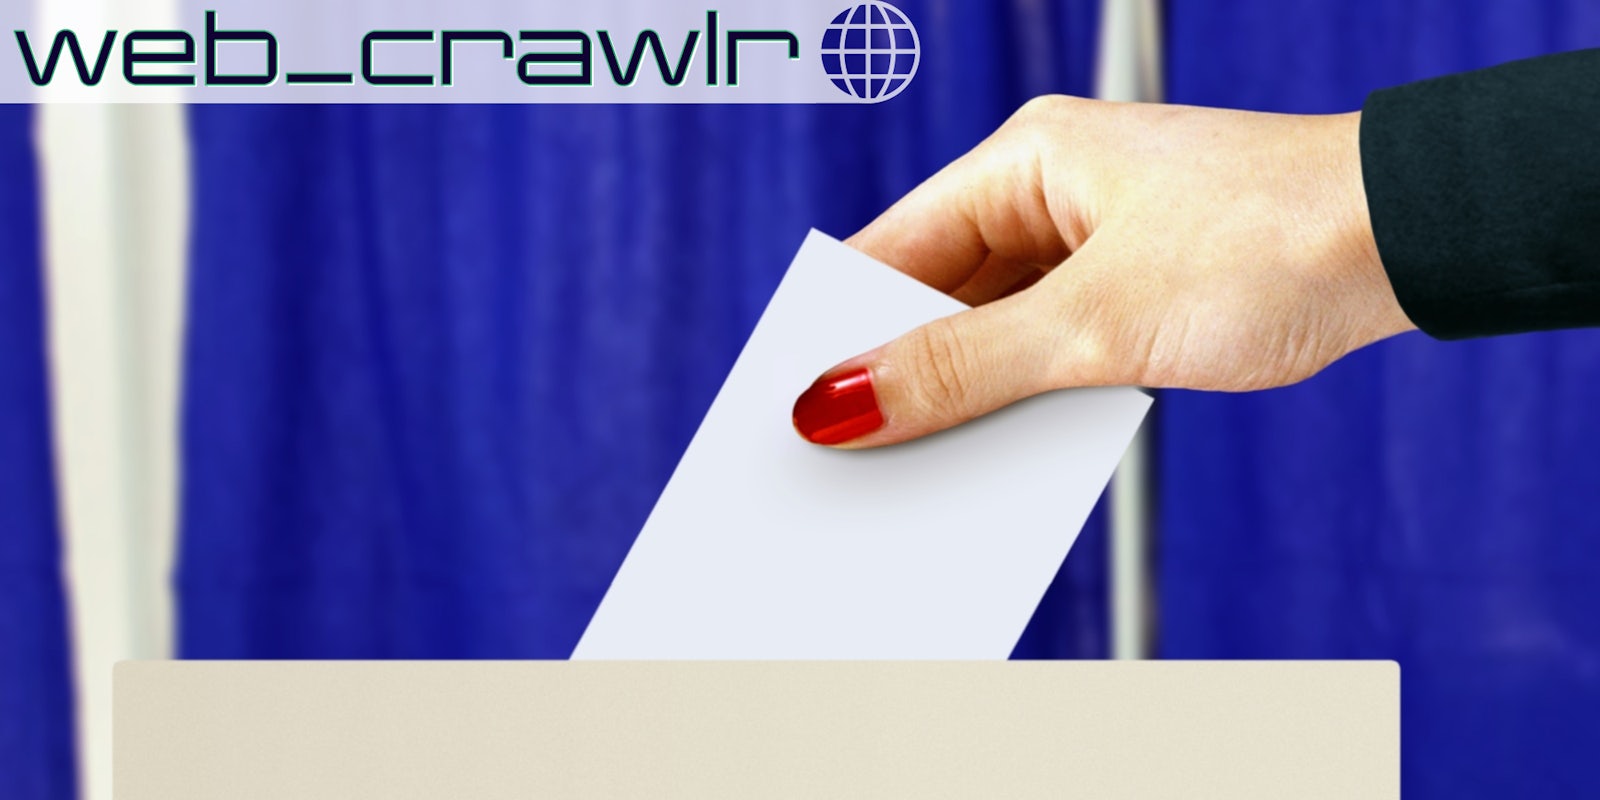 A woman's hand putting a ballot into a ballot box. The Daily Dot newsletter web_crawlr logo is in the top left corner.